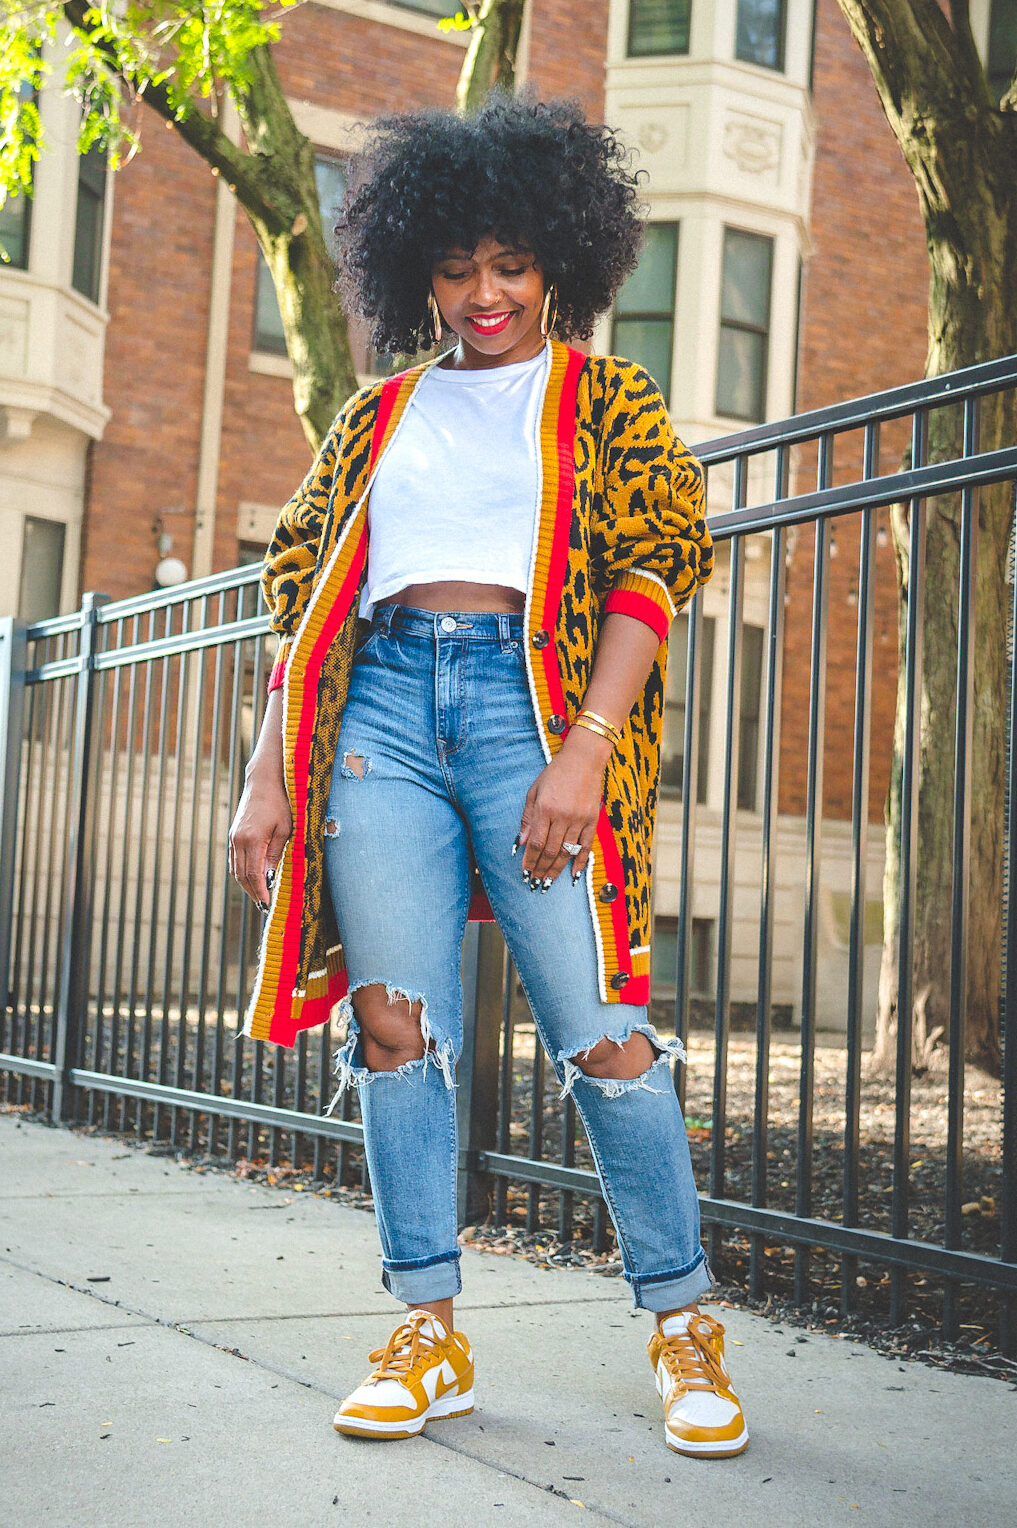 Sweenee Style, hbcu outfit idea, homecoming outfit, hbcu outfits, fall 2022 outfits, fall outfits, fall 2022